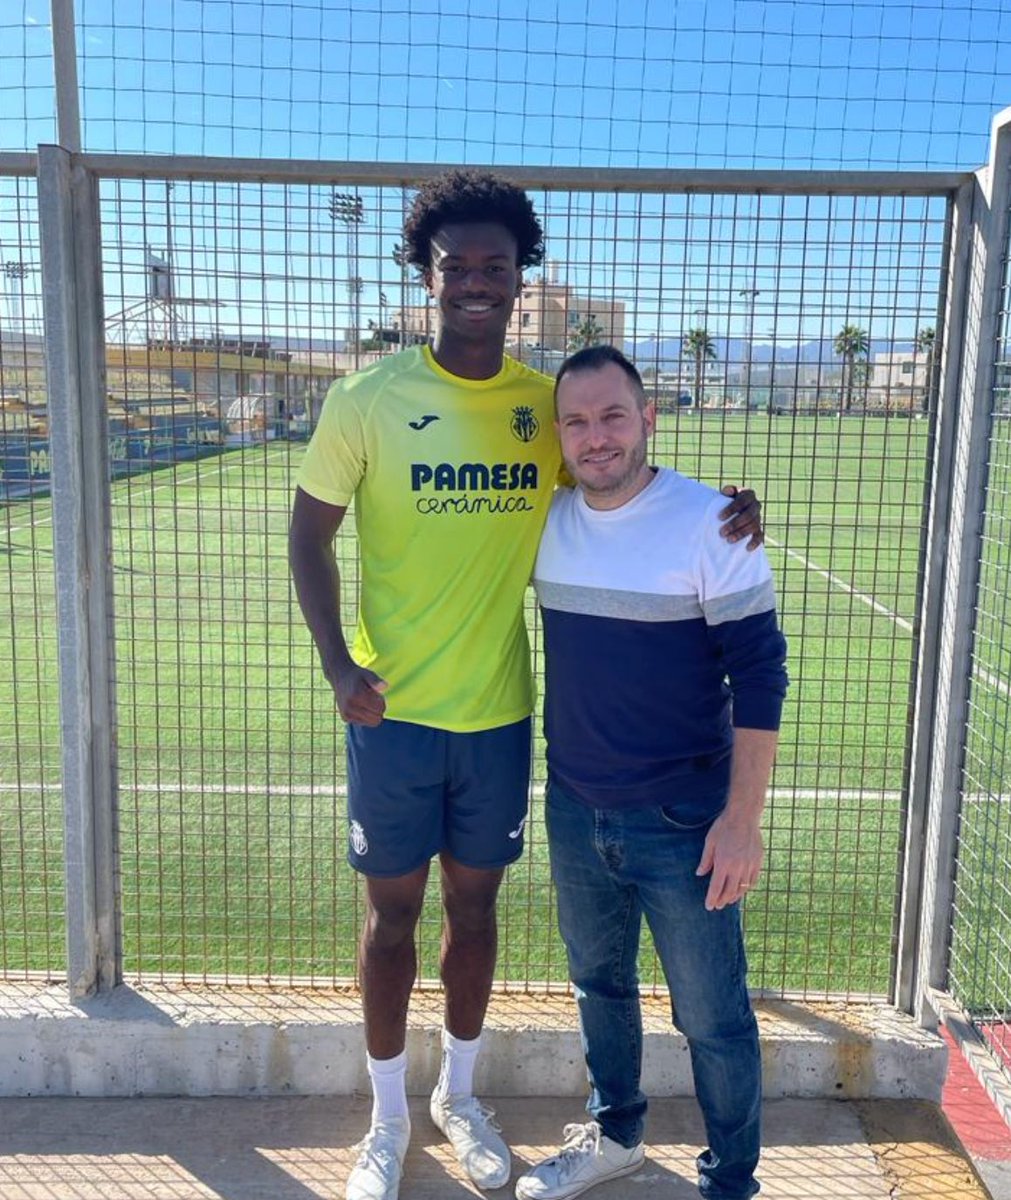 It  has confirmed that an offer was sent to DCU, by Villareal for  Matai Akinmboni @matai_1000 , but details the offer have not been confirmed.  @SoccerInsider
#RepPGCounty